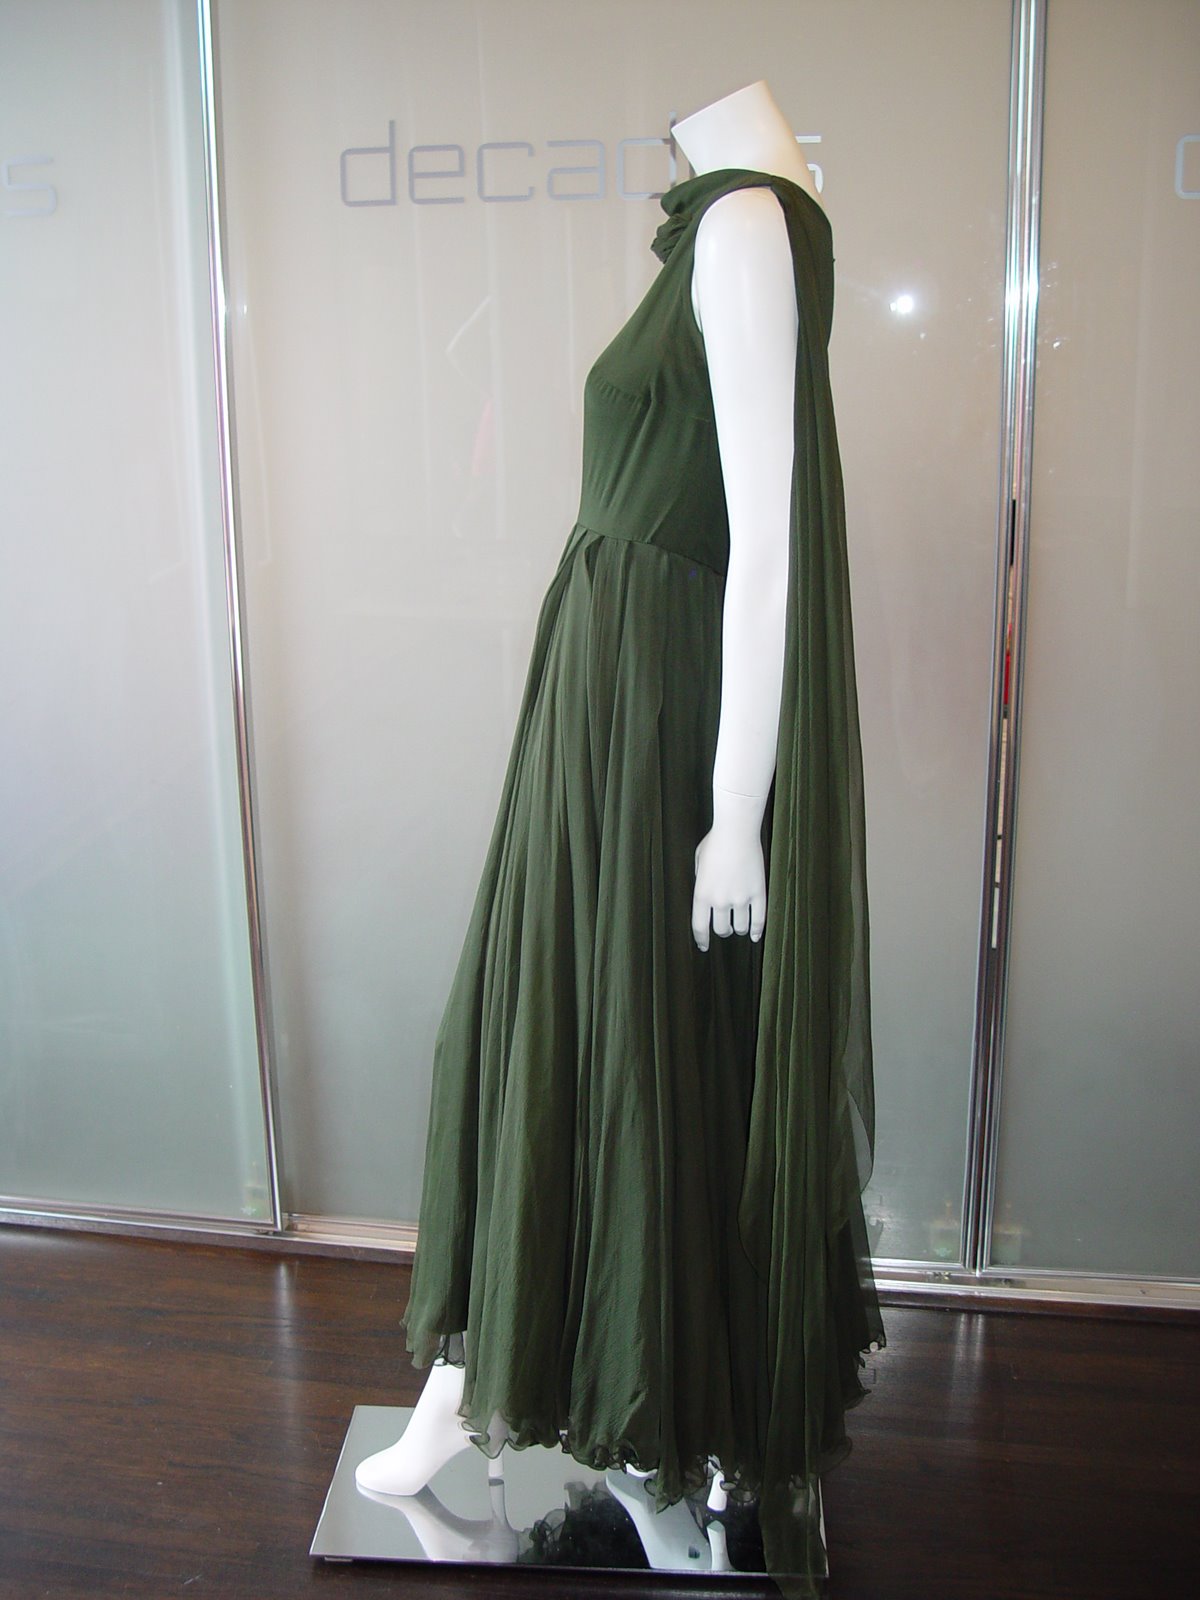 [JAMES+GALANOS+OLIVE+CHIFFON+BATEAU+NECK+LAYERED+GOWN+WITH+ATTACHED+SCARF+THROUGH+NECKLINE+C+LATE+1950S.JPG+(1).JPG]